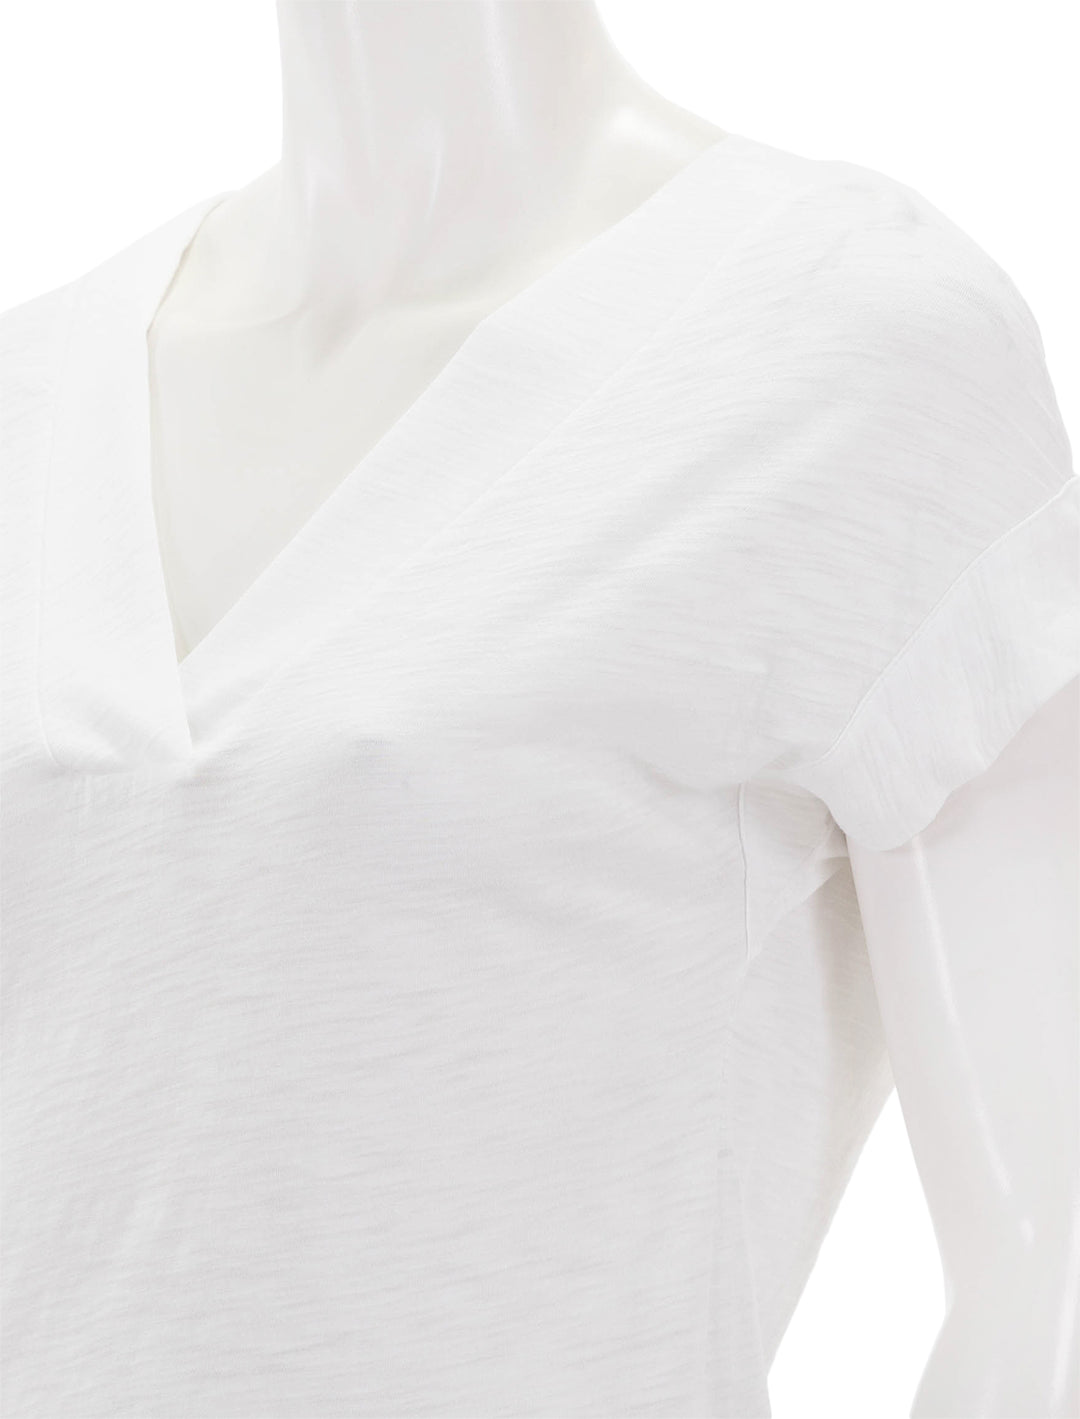 Close-up view of Goldie Lewinter's mariana basic v neck in white.